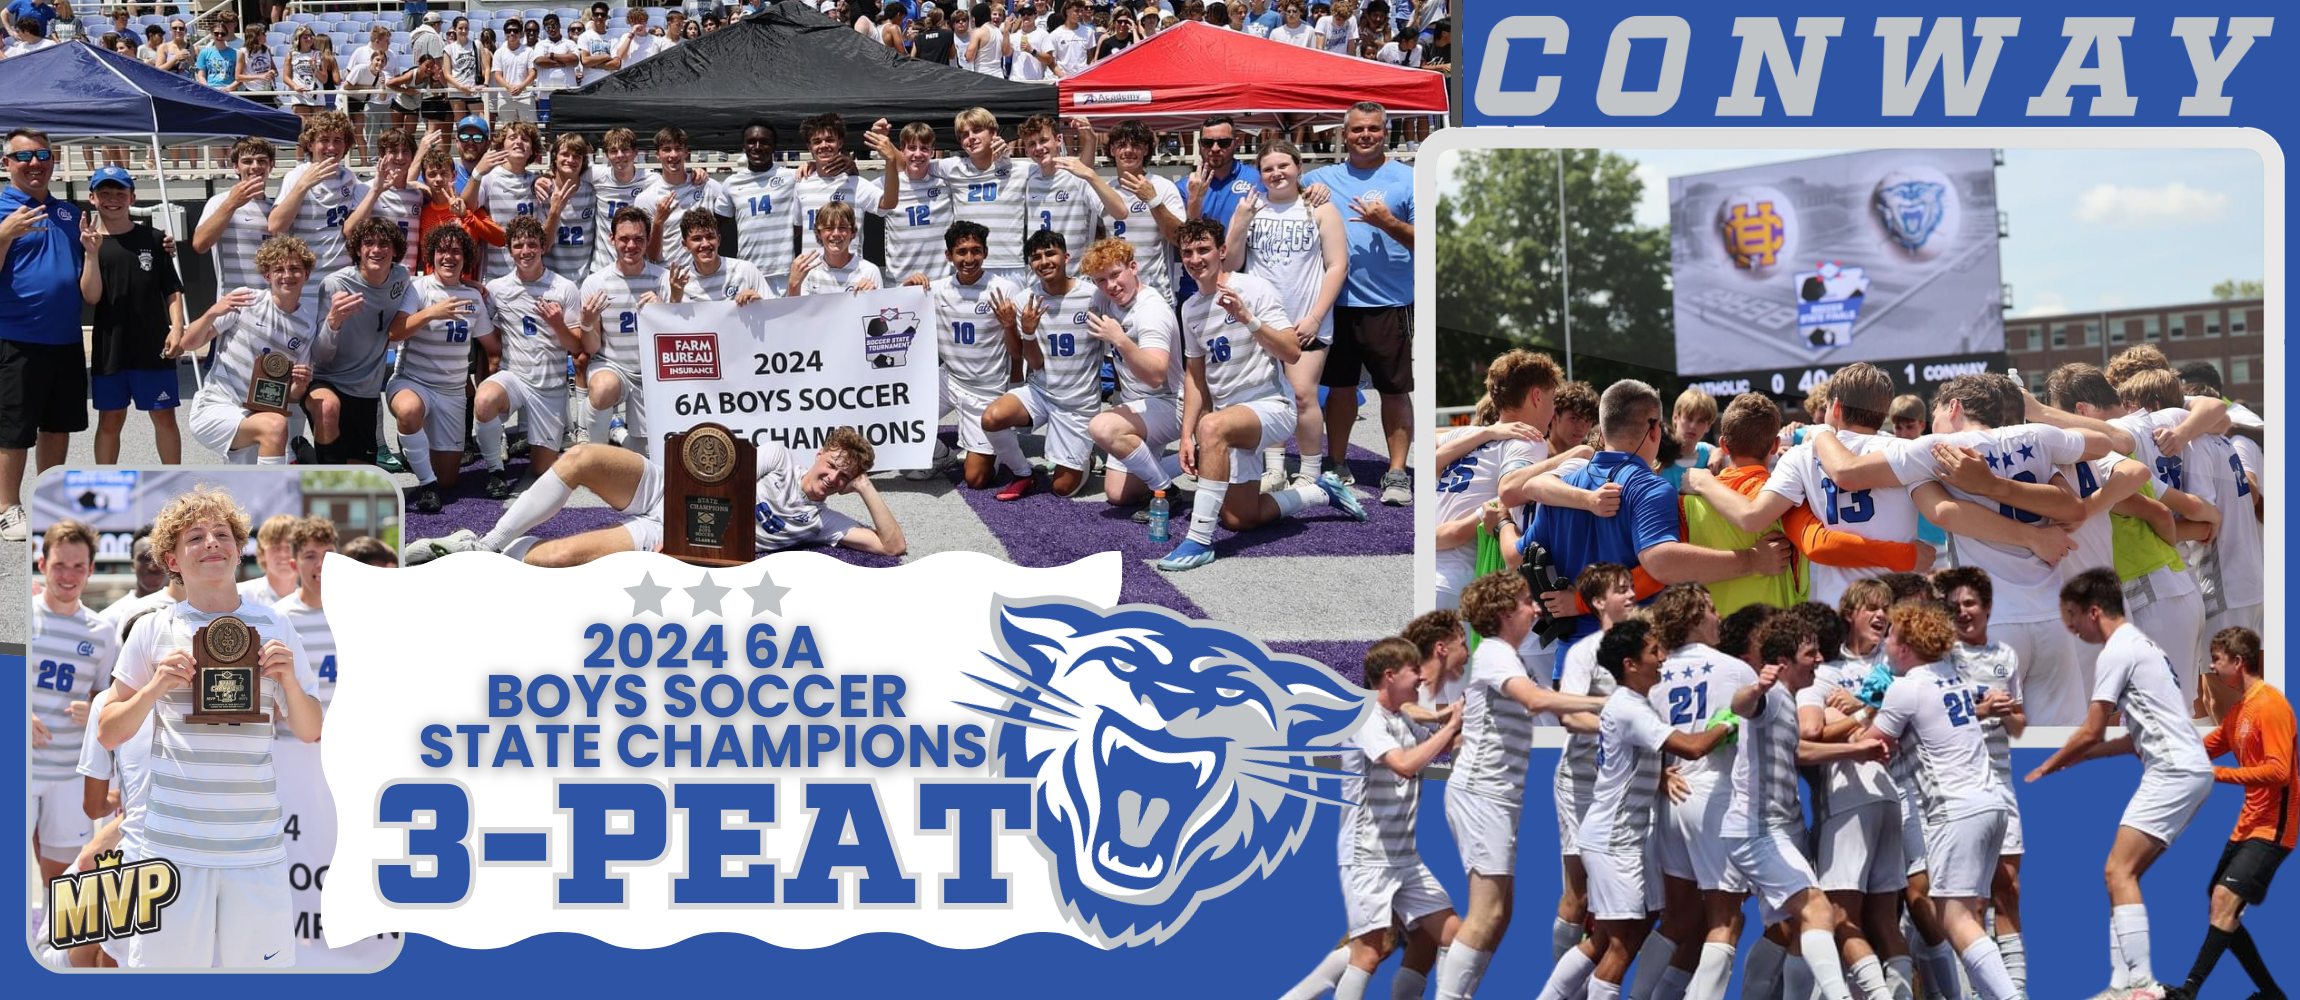 CPSD Boys Soccer with 3rd Consecutive State Title